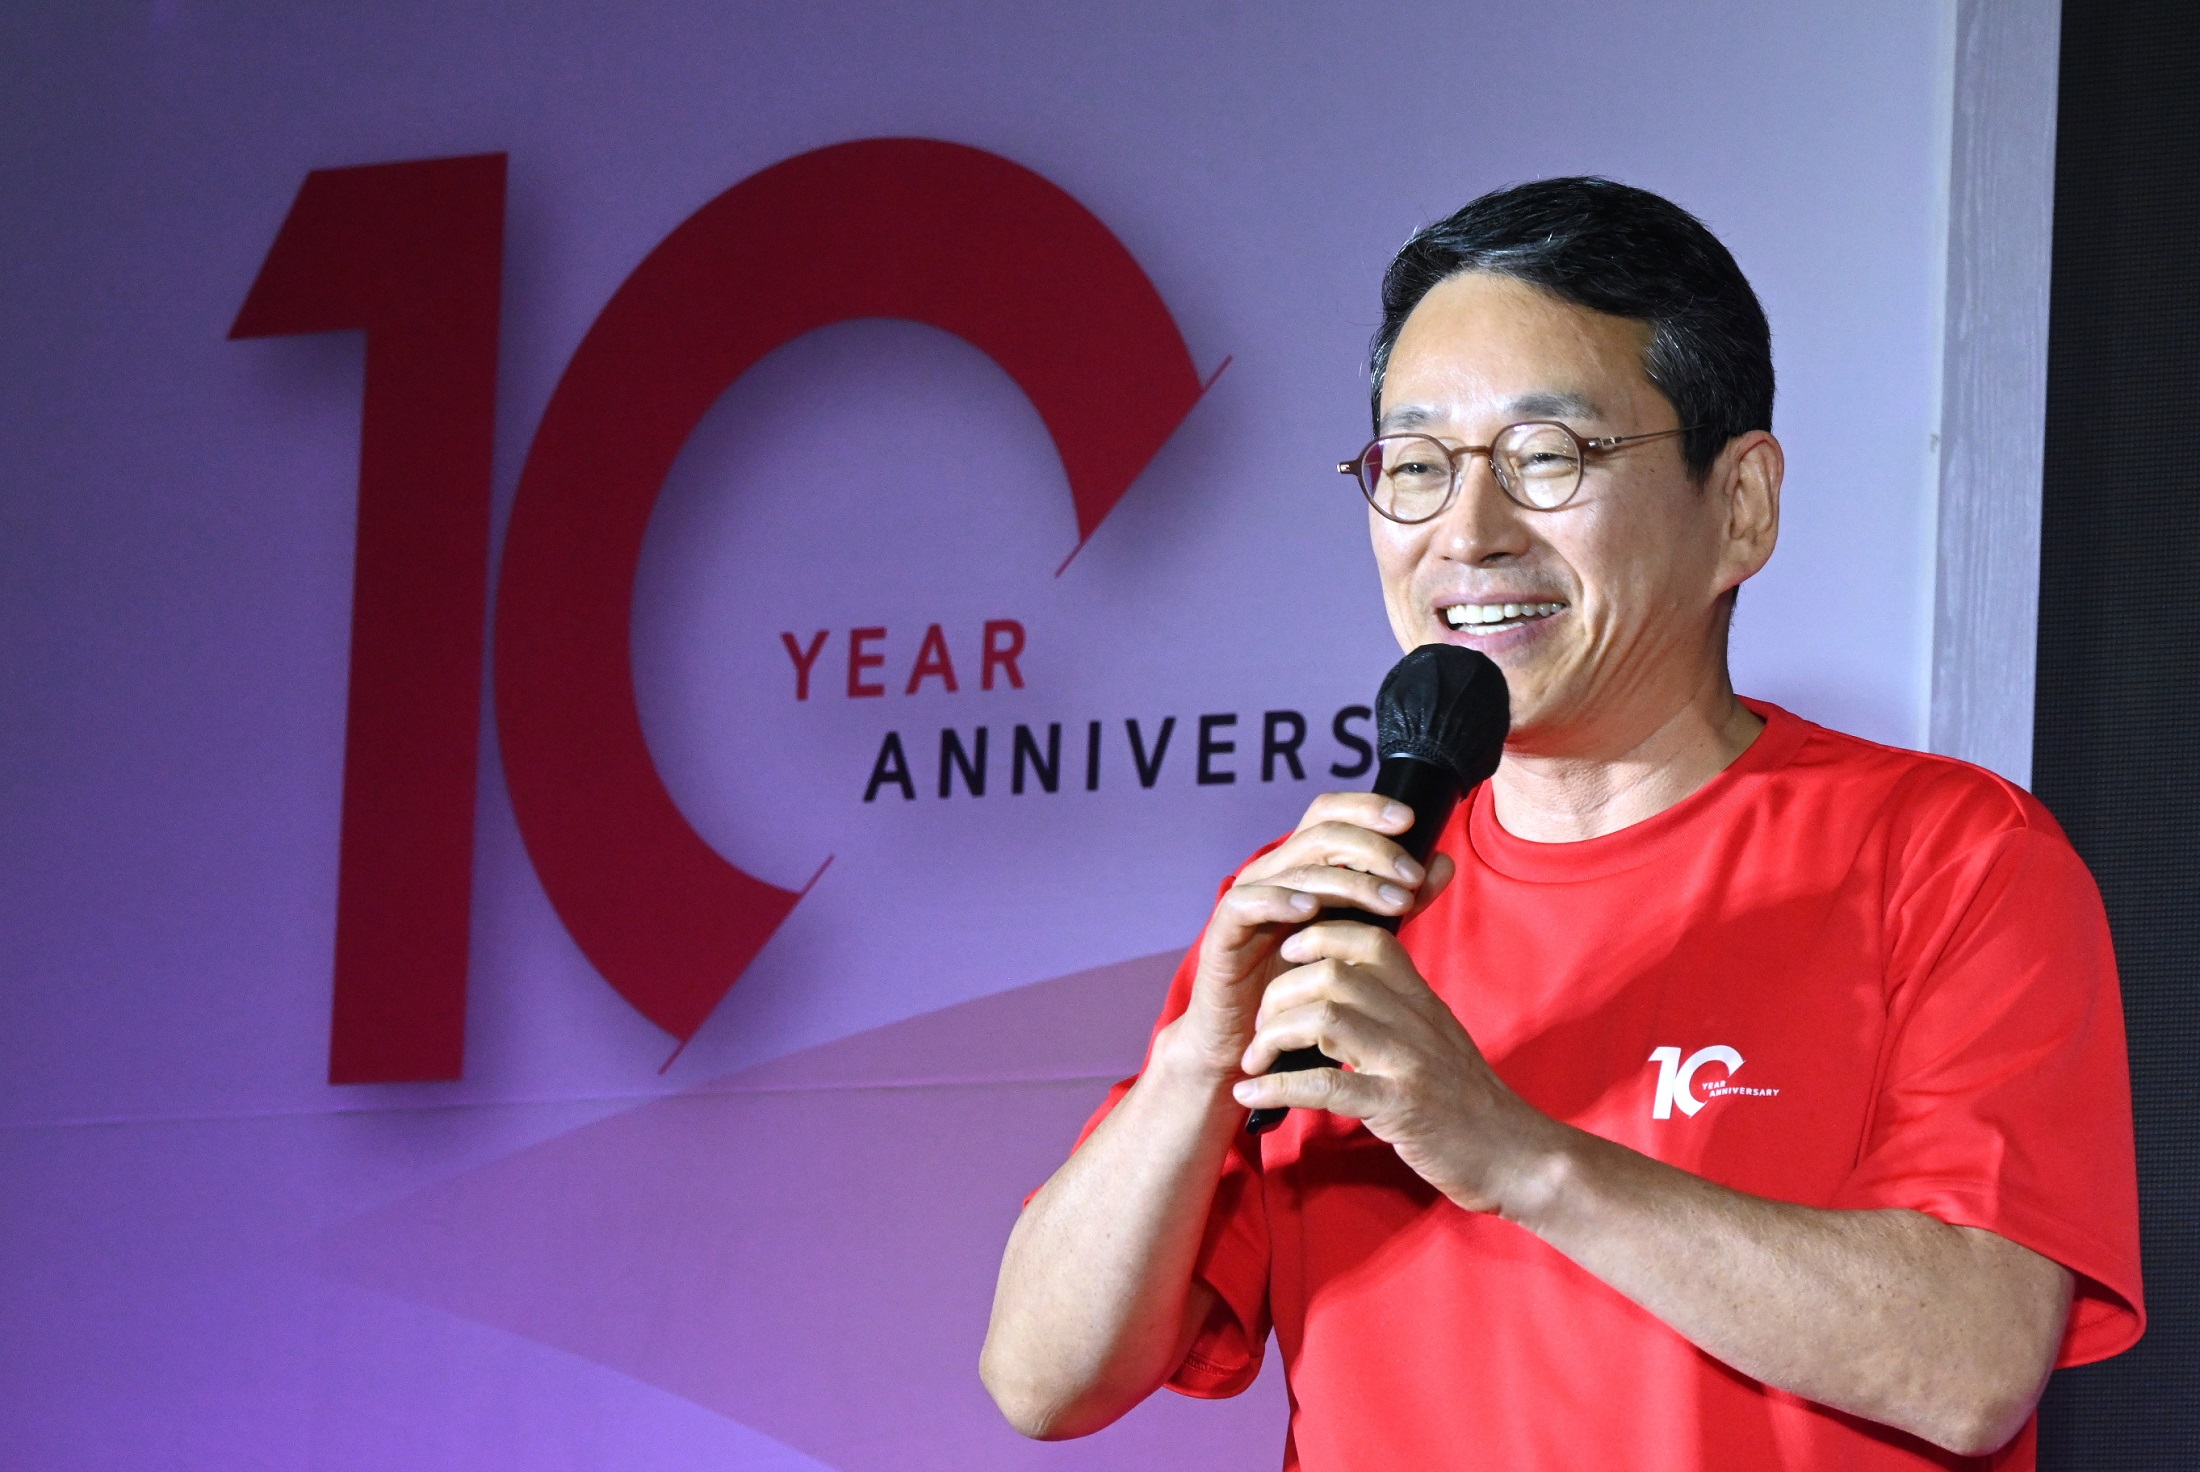 LG CEO Cho giving a speech at the event celebrating 10th anniversary of LG Vehicle component Solutions Company